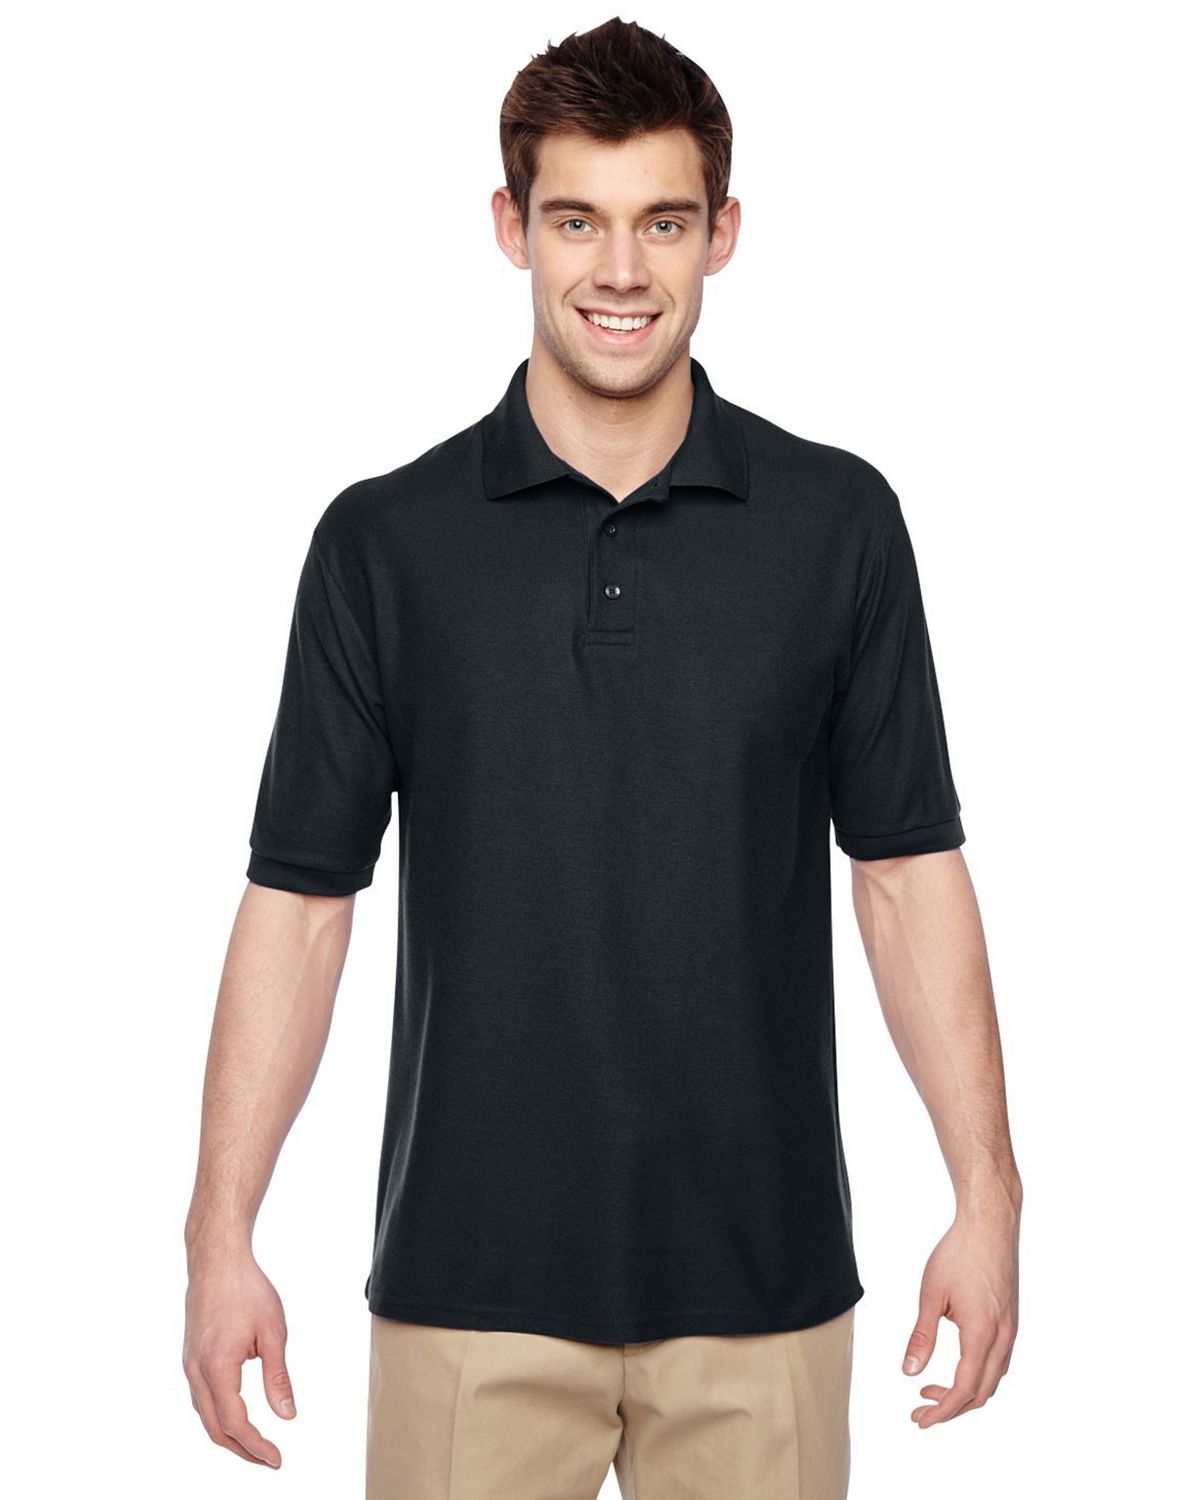 Size Chart for Jerzees 537MSR Mens 5.3 oz. Easy Care Polo Shirt